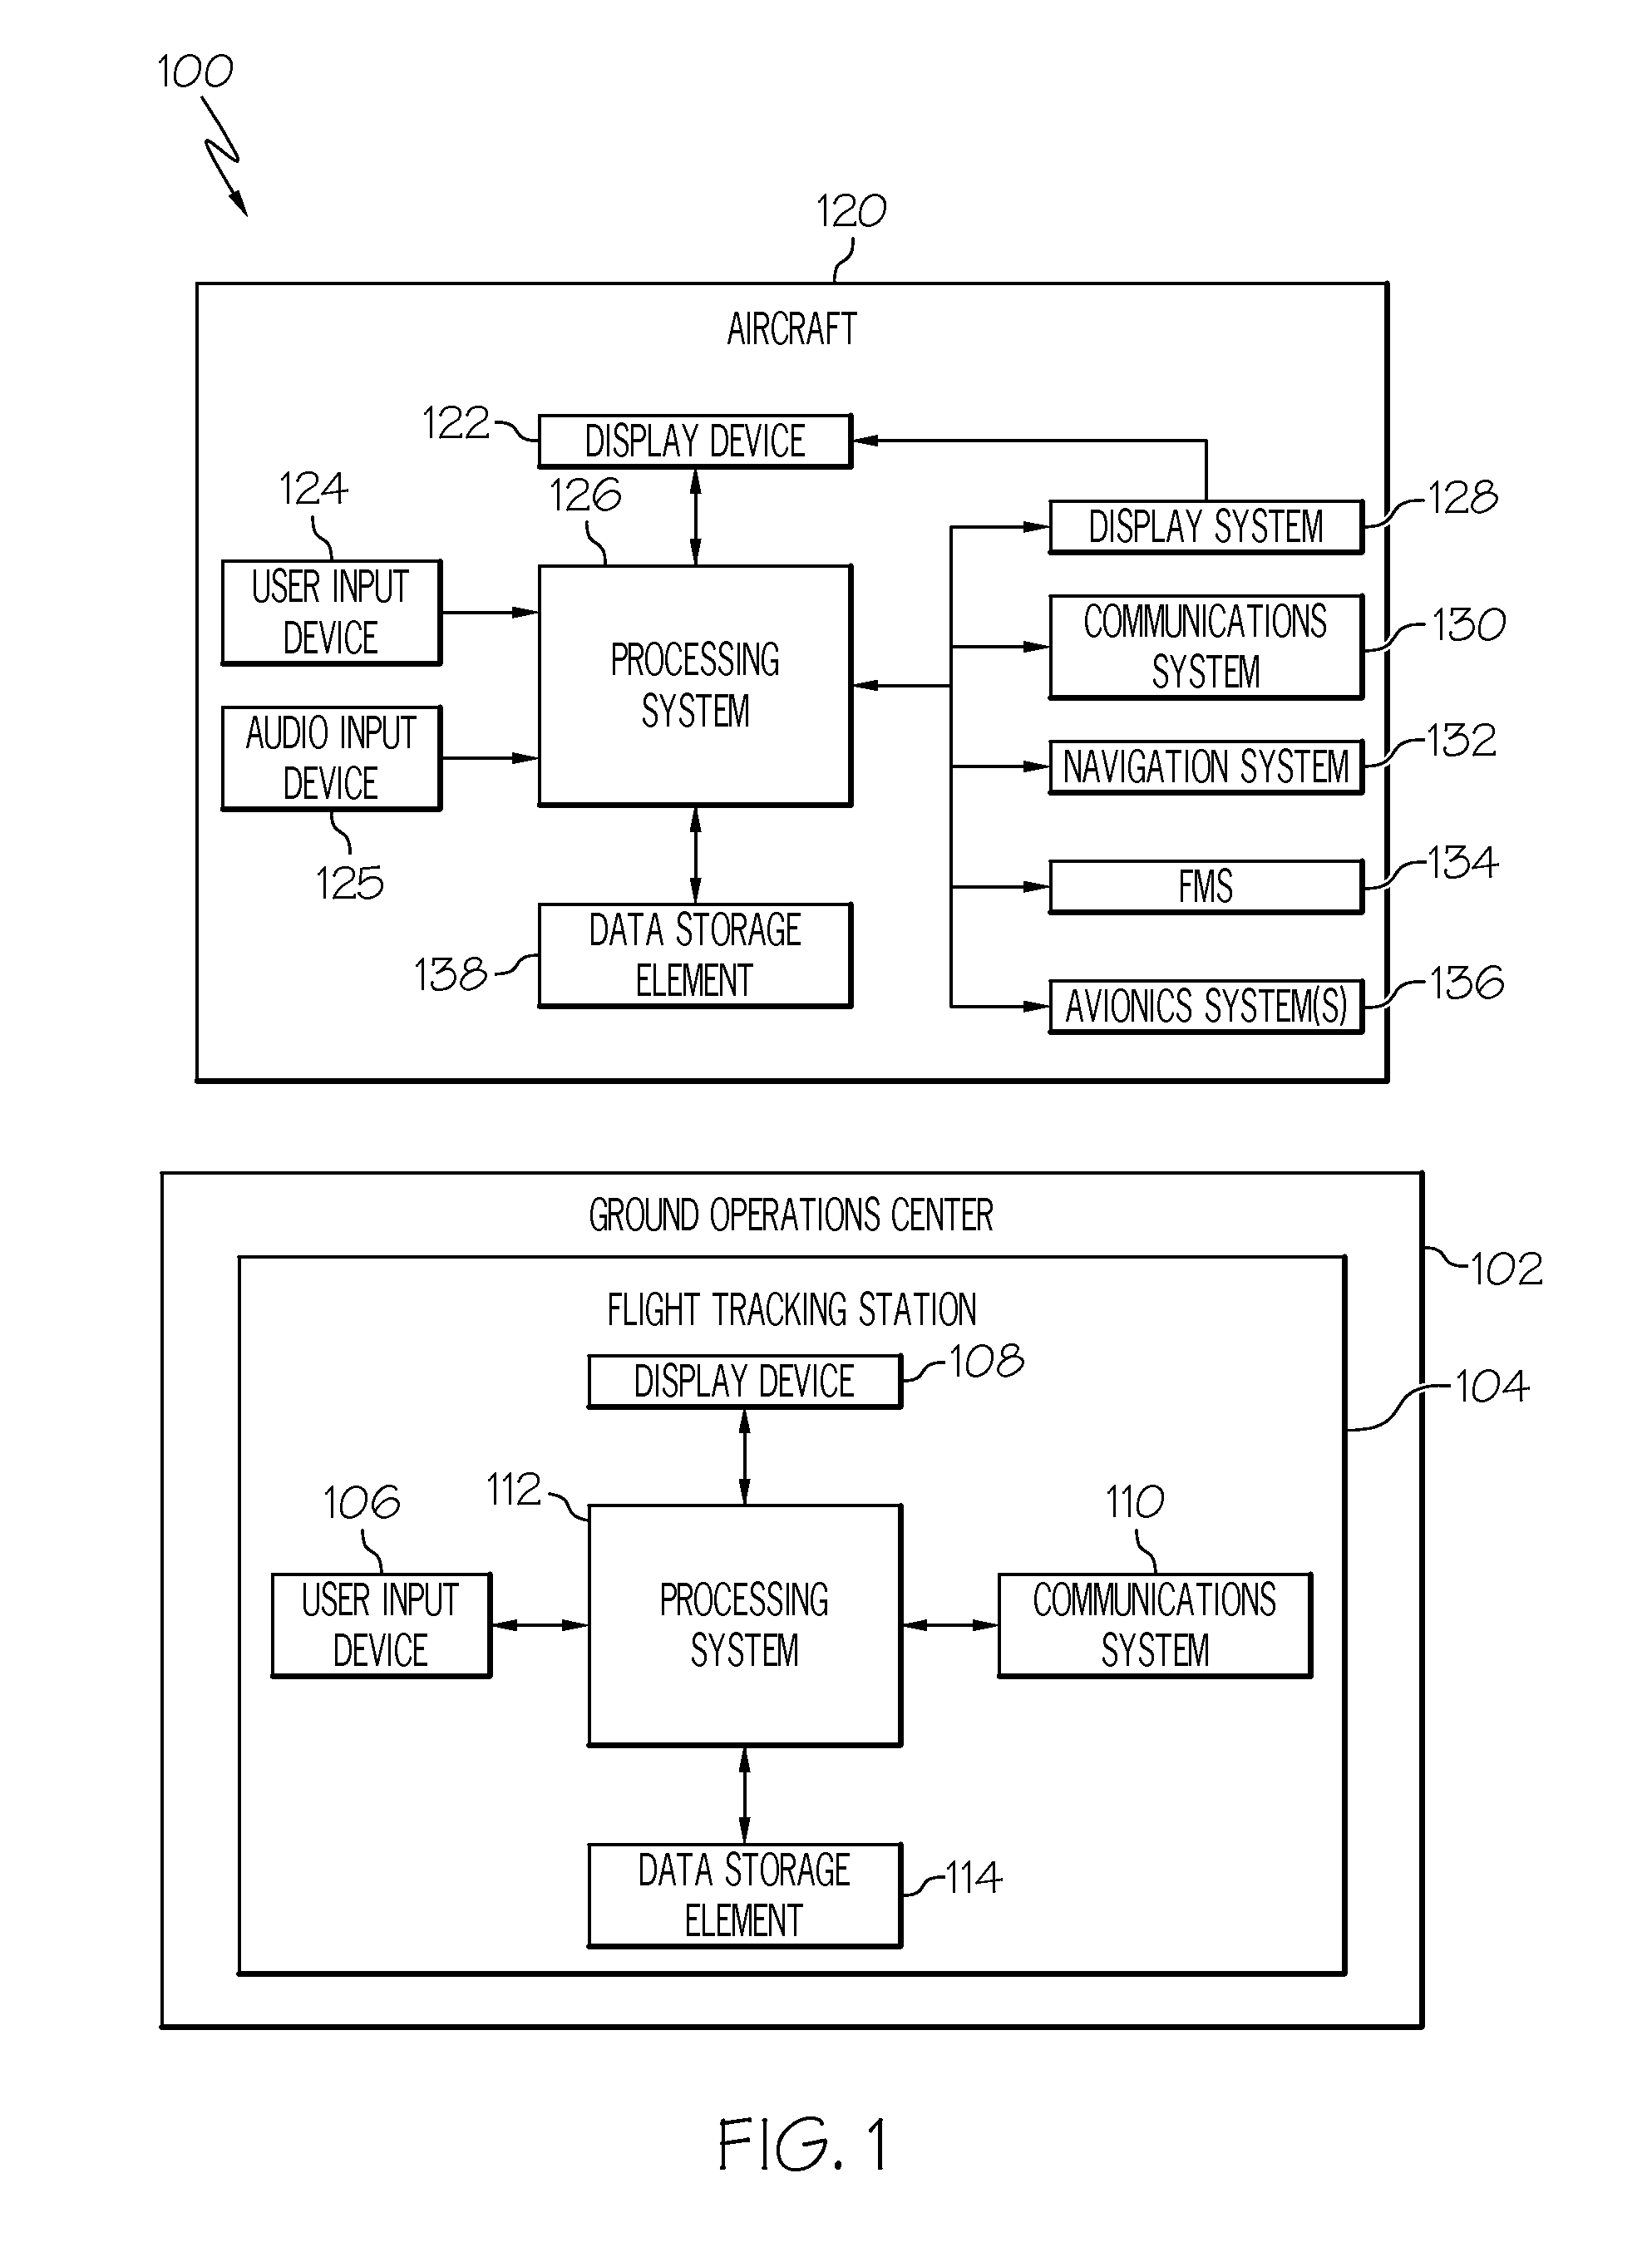 Methods and systems for communicating audio captured onboard an aircraft